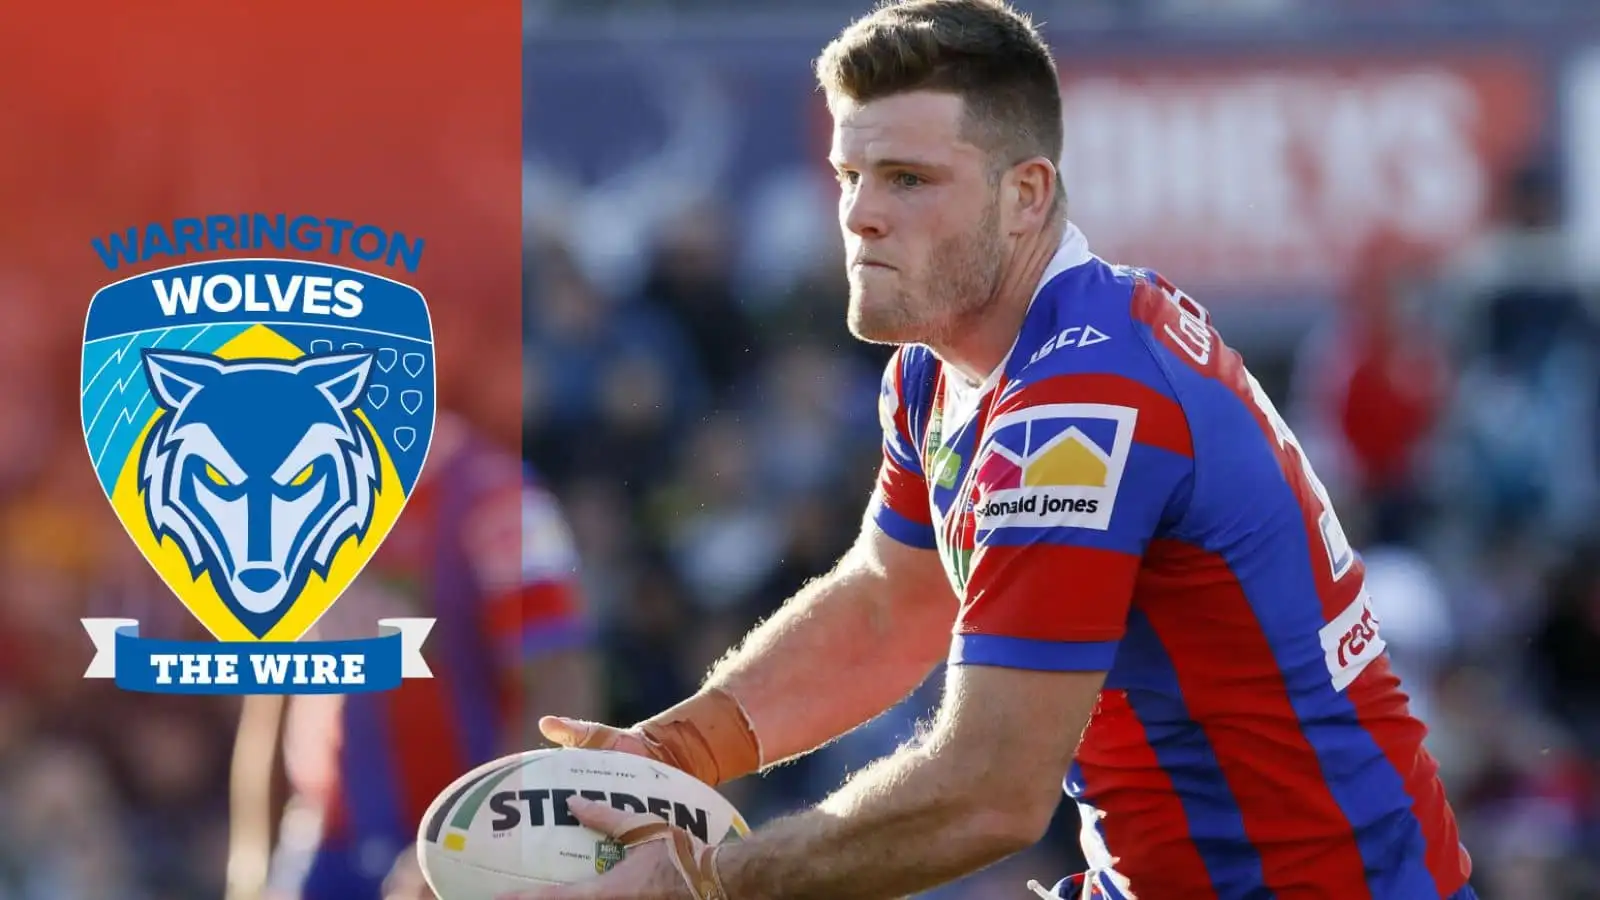 Warrington Wolves see off Leeds Rhinos and two other Super League rivals to sign classy NRL forward